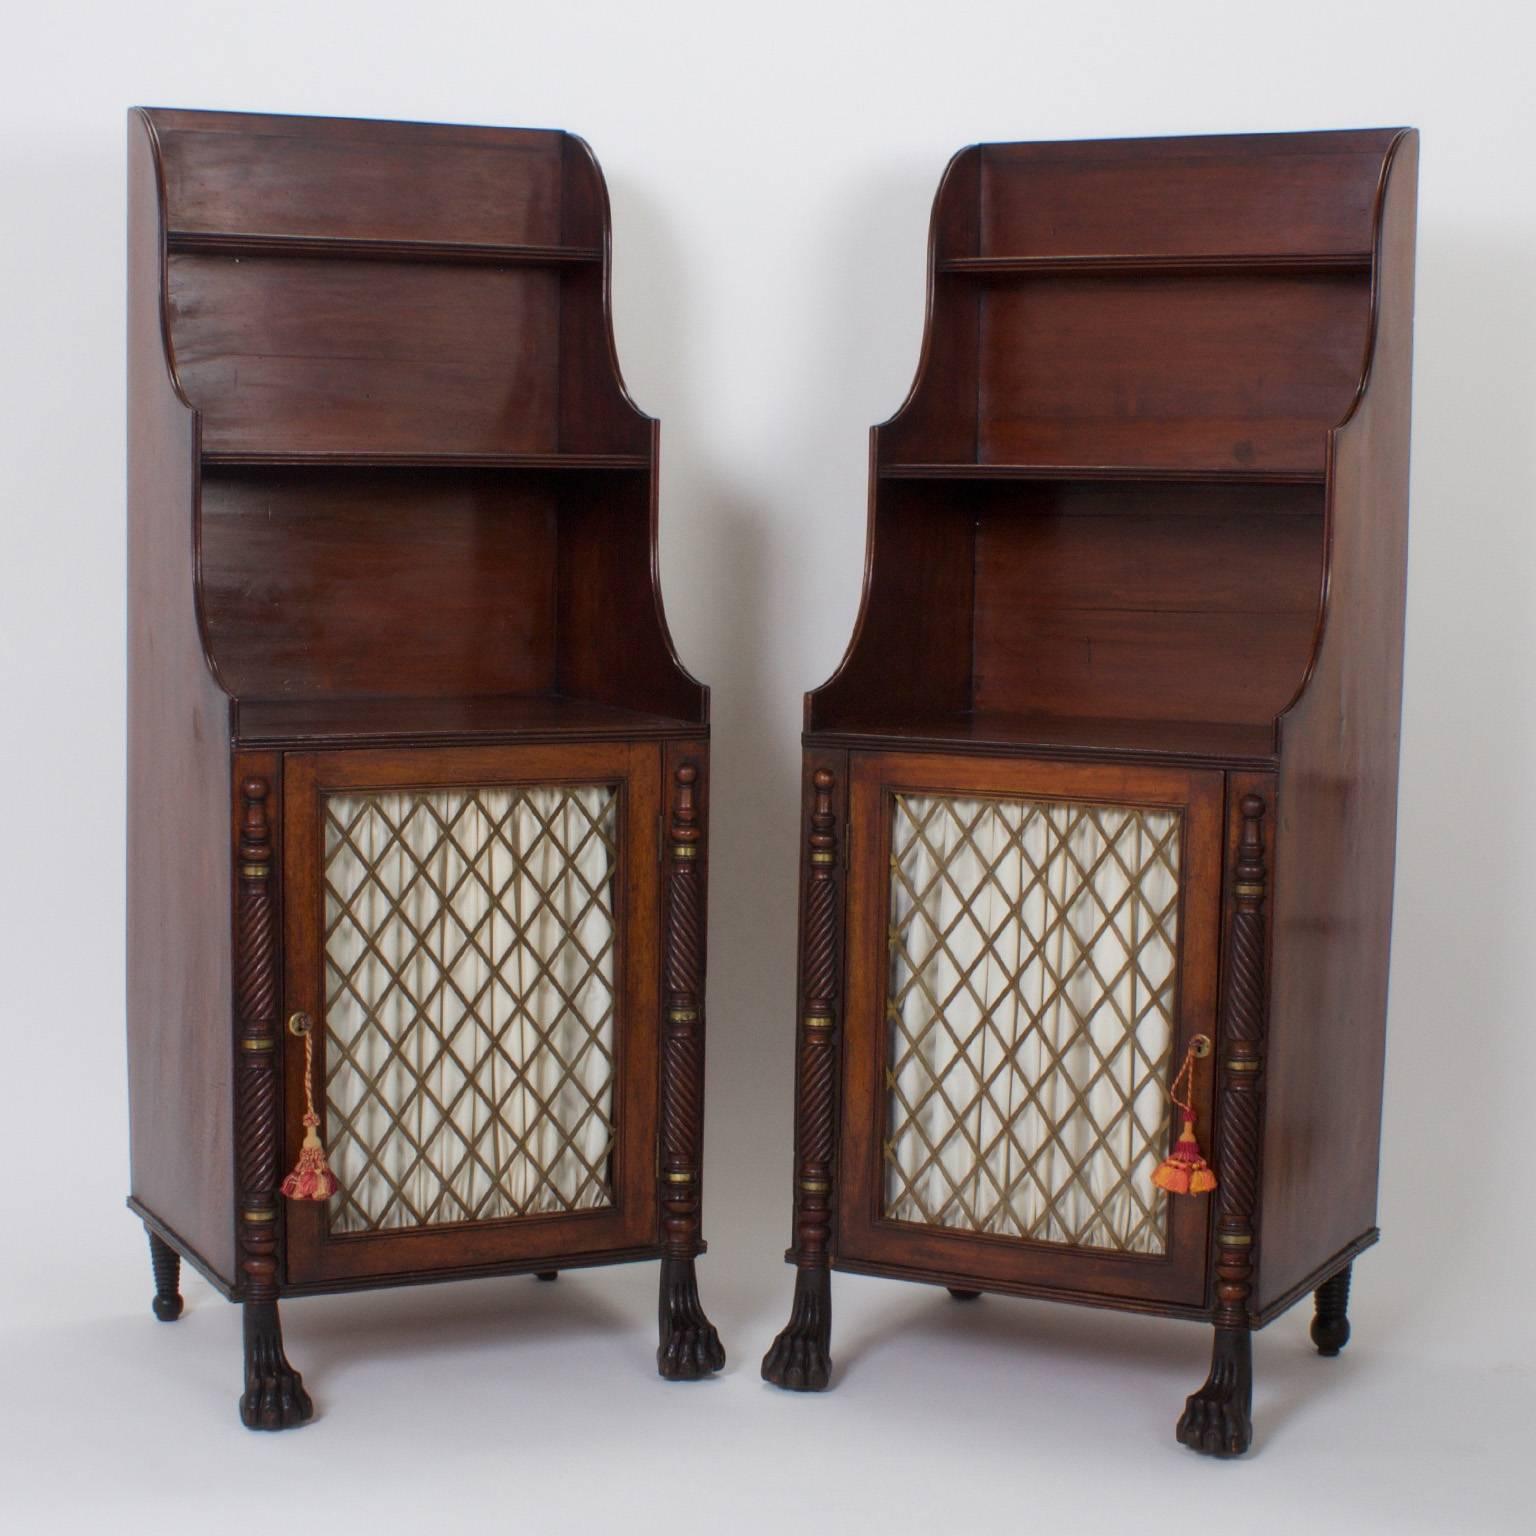 Rare pair of traditional Irish chiffoniers or sideboards crafted with mahogany and celebrating several early 19th century styles, including empire and regency. Featuring high quality brass metal work and carved columns with Egyptian revival cats paw